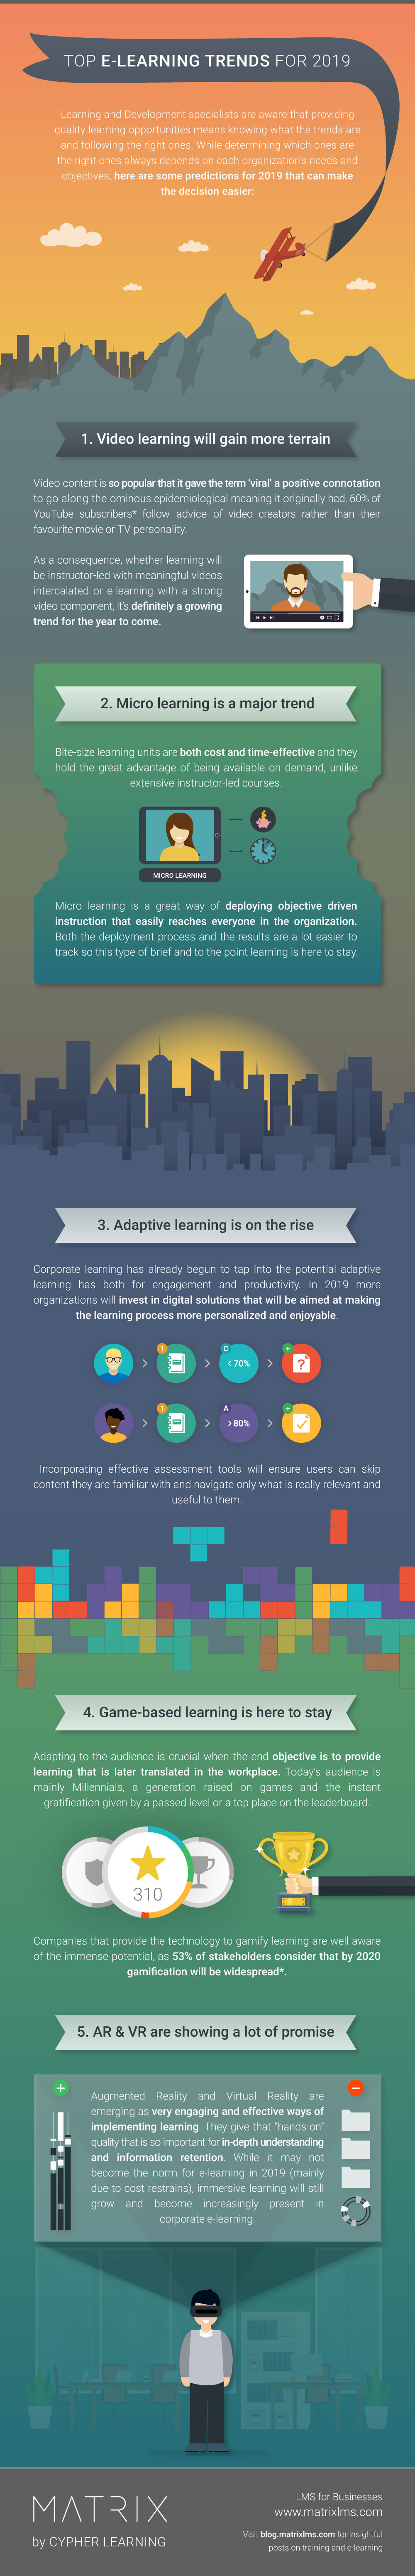 top-e-learning-trends-for-2019 infographic | Business Blog